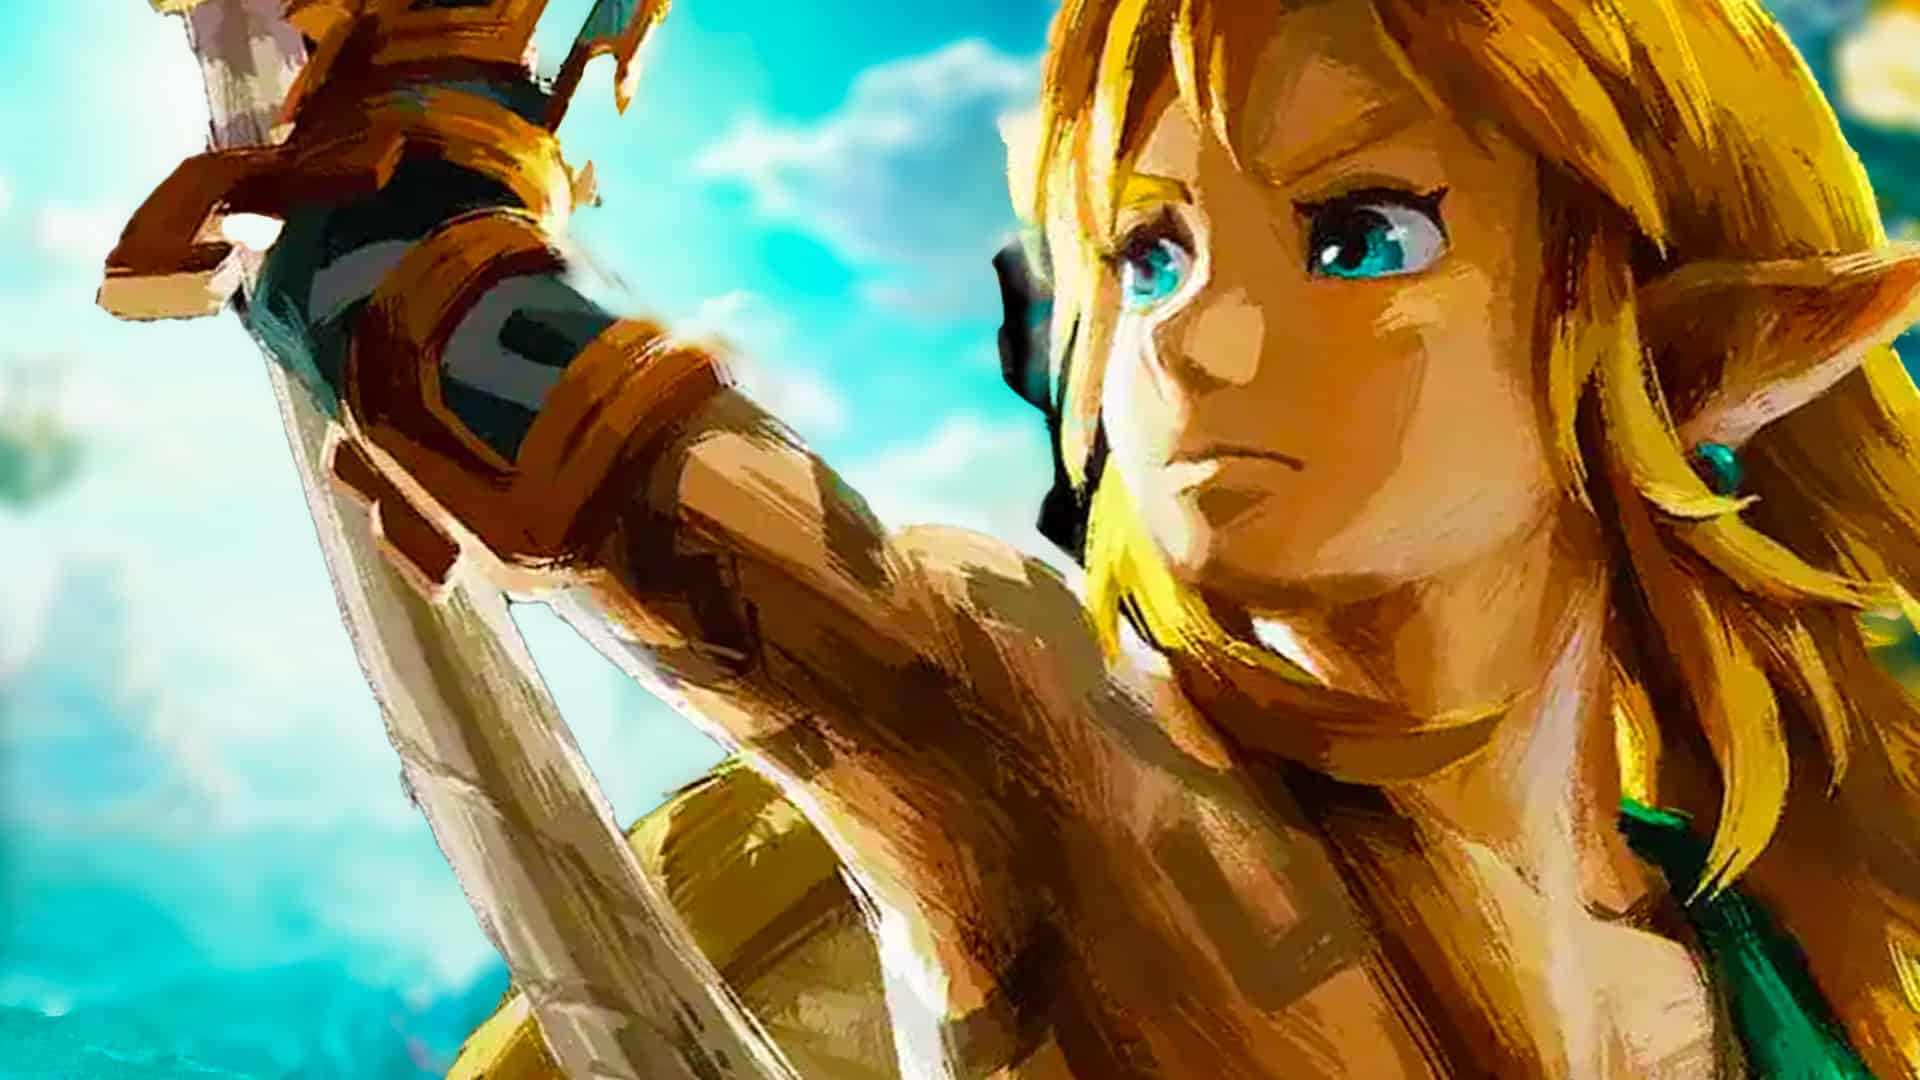 Who will play Zelda & Link? Nintendo could cast these in Zelda movie